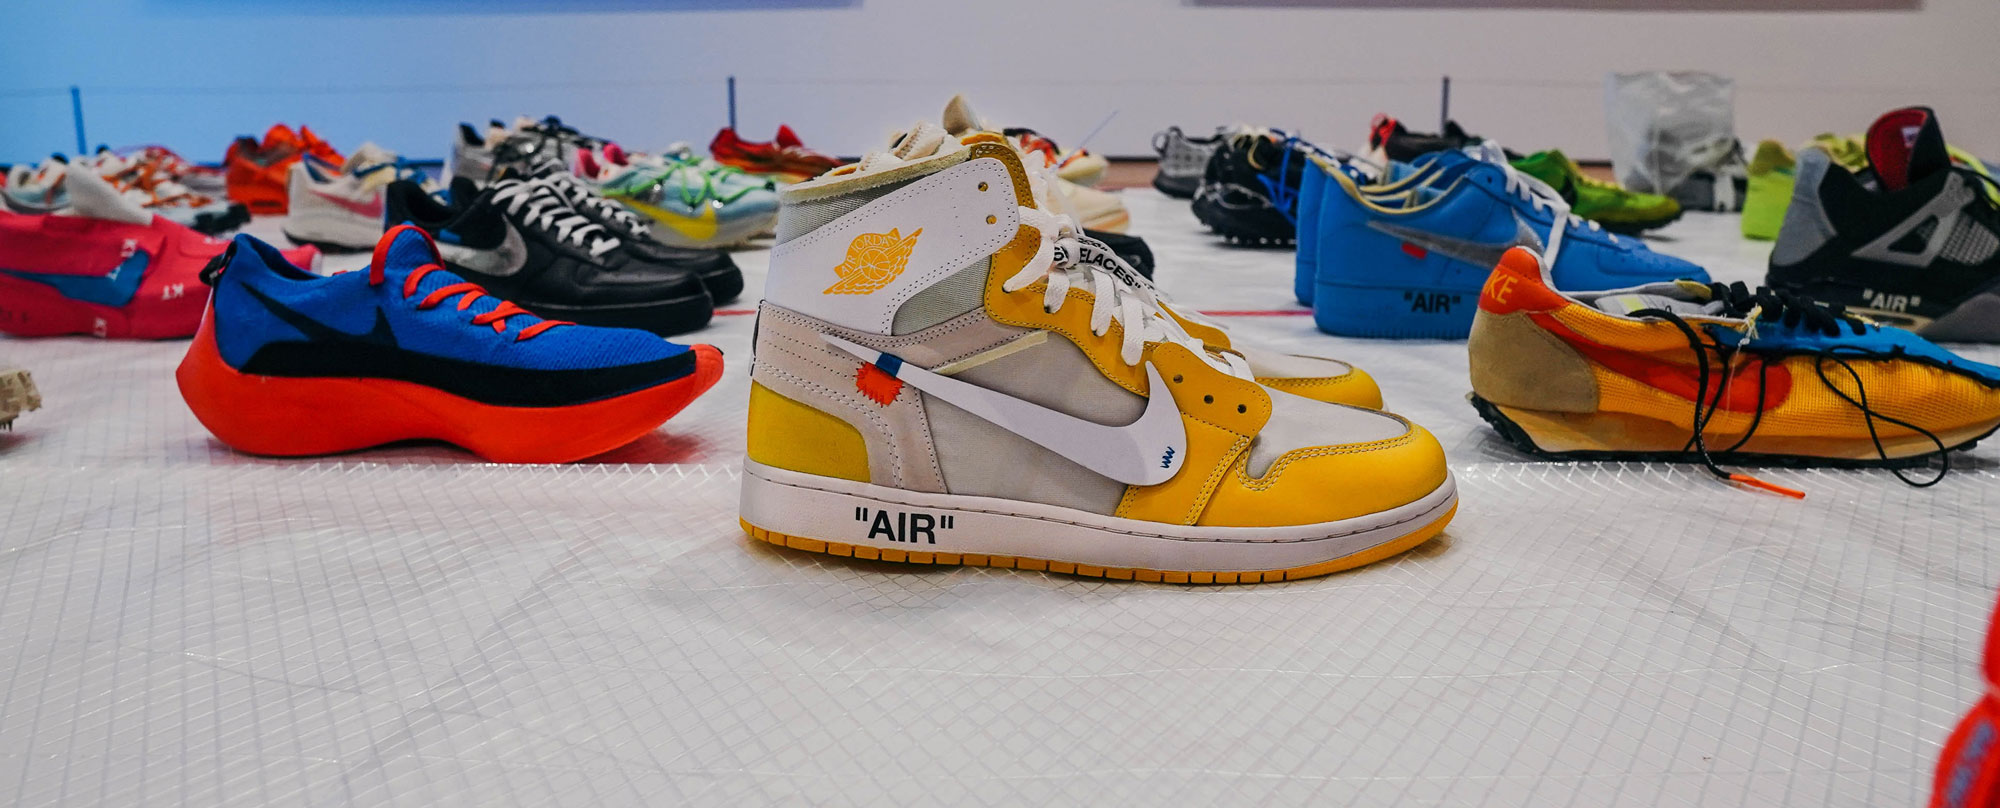 Top 5 Affordable OFF-WHITE x Nike Sneakers - Novelship News